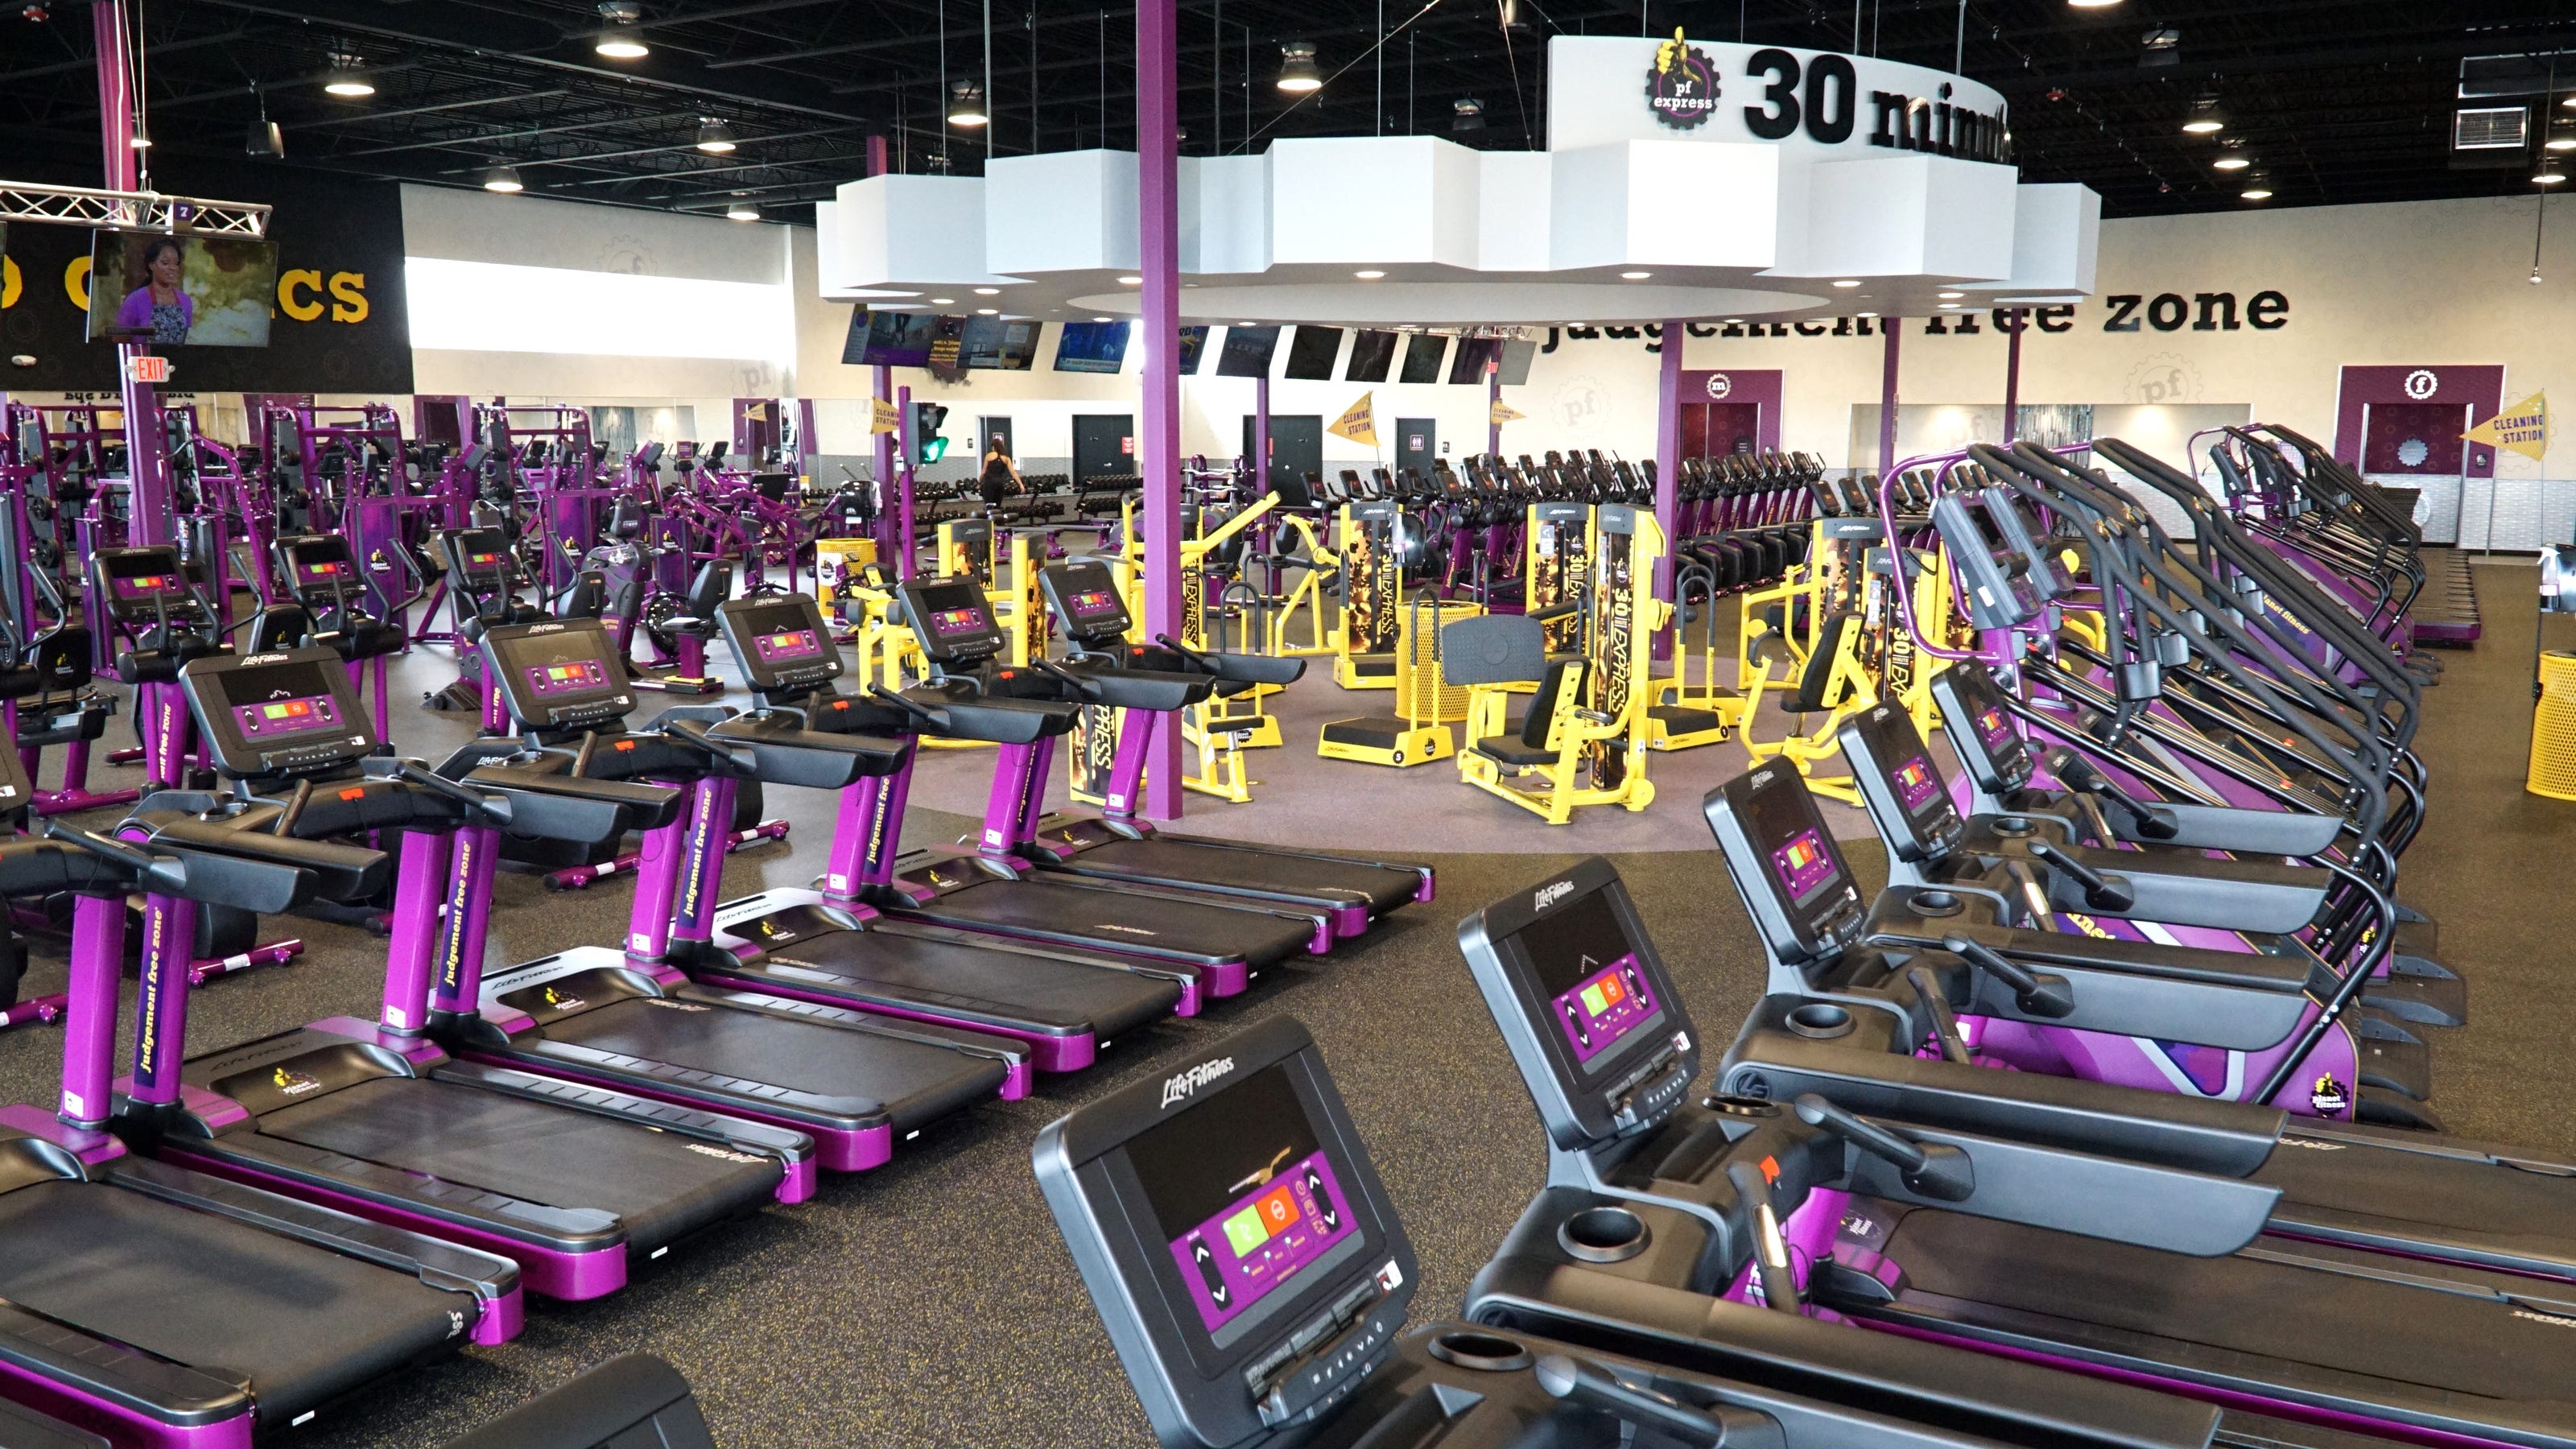 19 Comfortable How much is starting pay at planet fitness Workout at Home